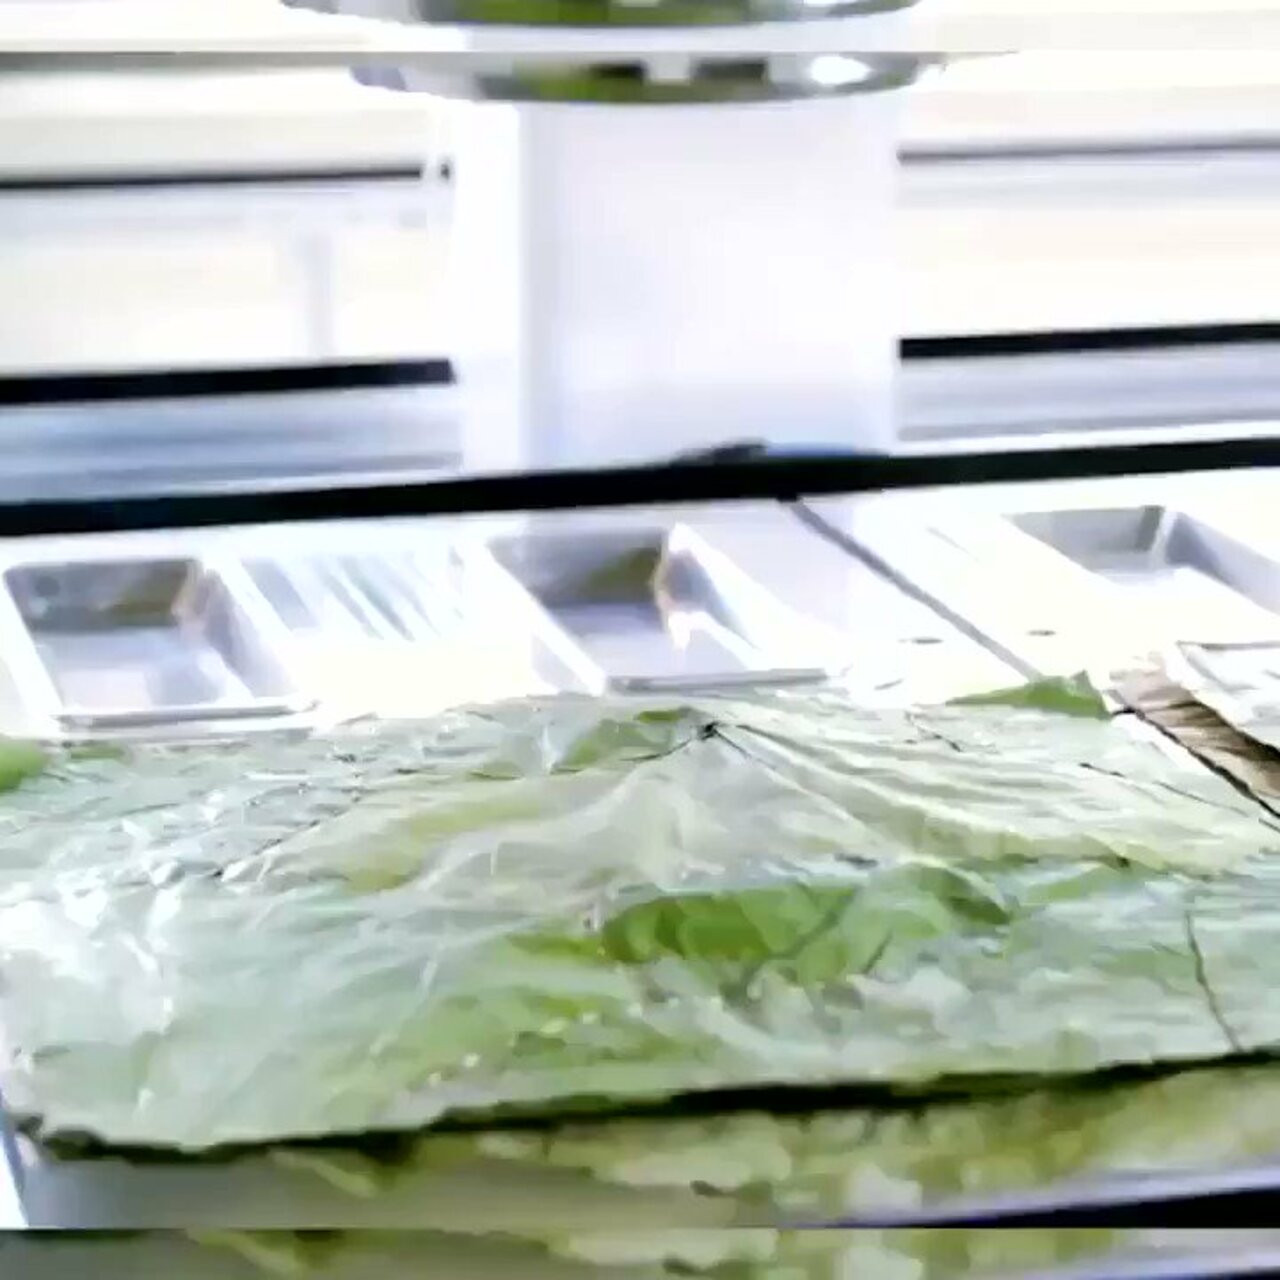 The biodegradable plates are designed to reduce plastic waste by @cheddar #Tech #Technology #Innovation #Business #Influencer #IT Cc: @enricomolinari @evankirstel @pierrepinna @helene_wpli https://t.co/Dft6mWxUZF